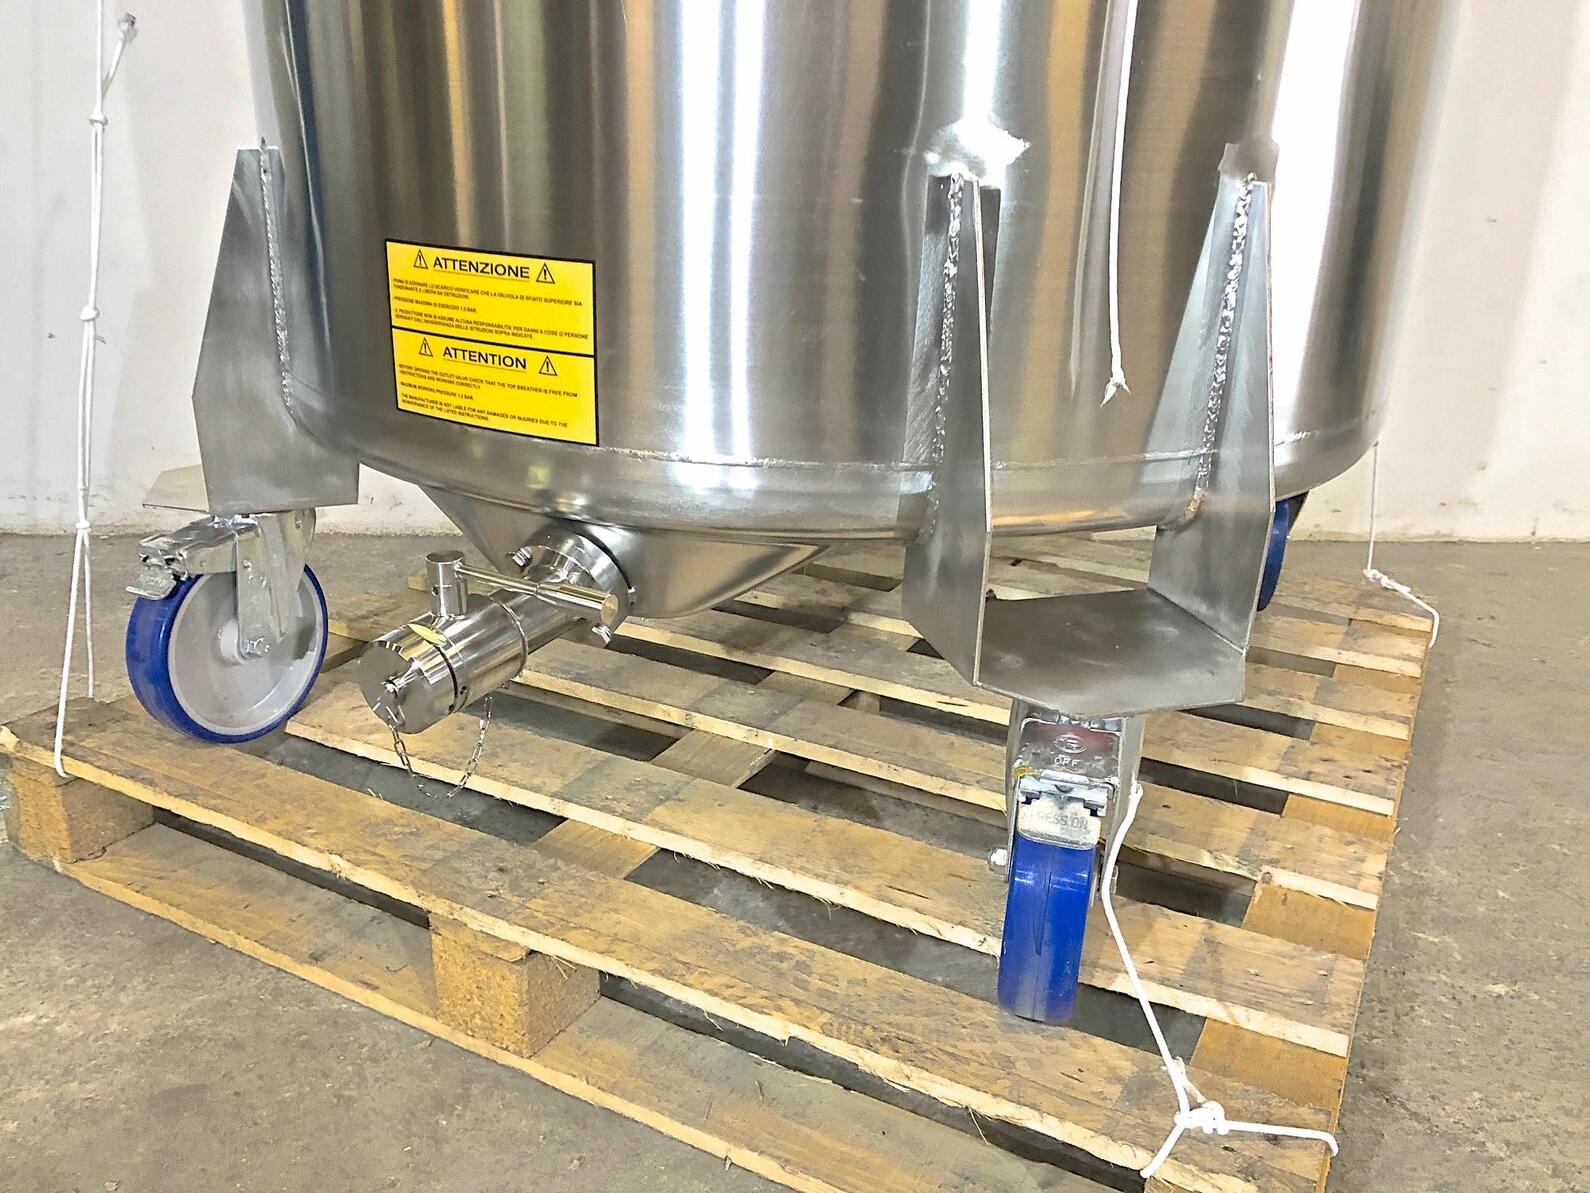 304 stainless steel tank - Model SCL750